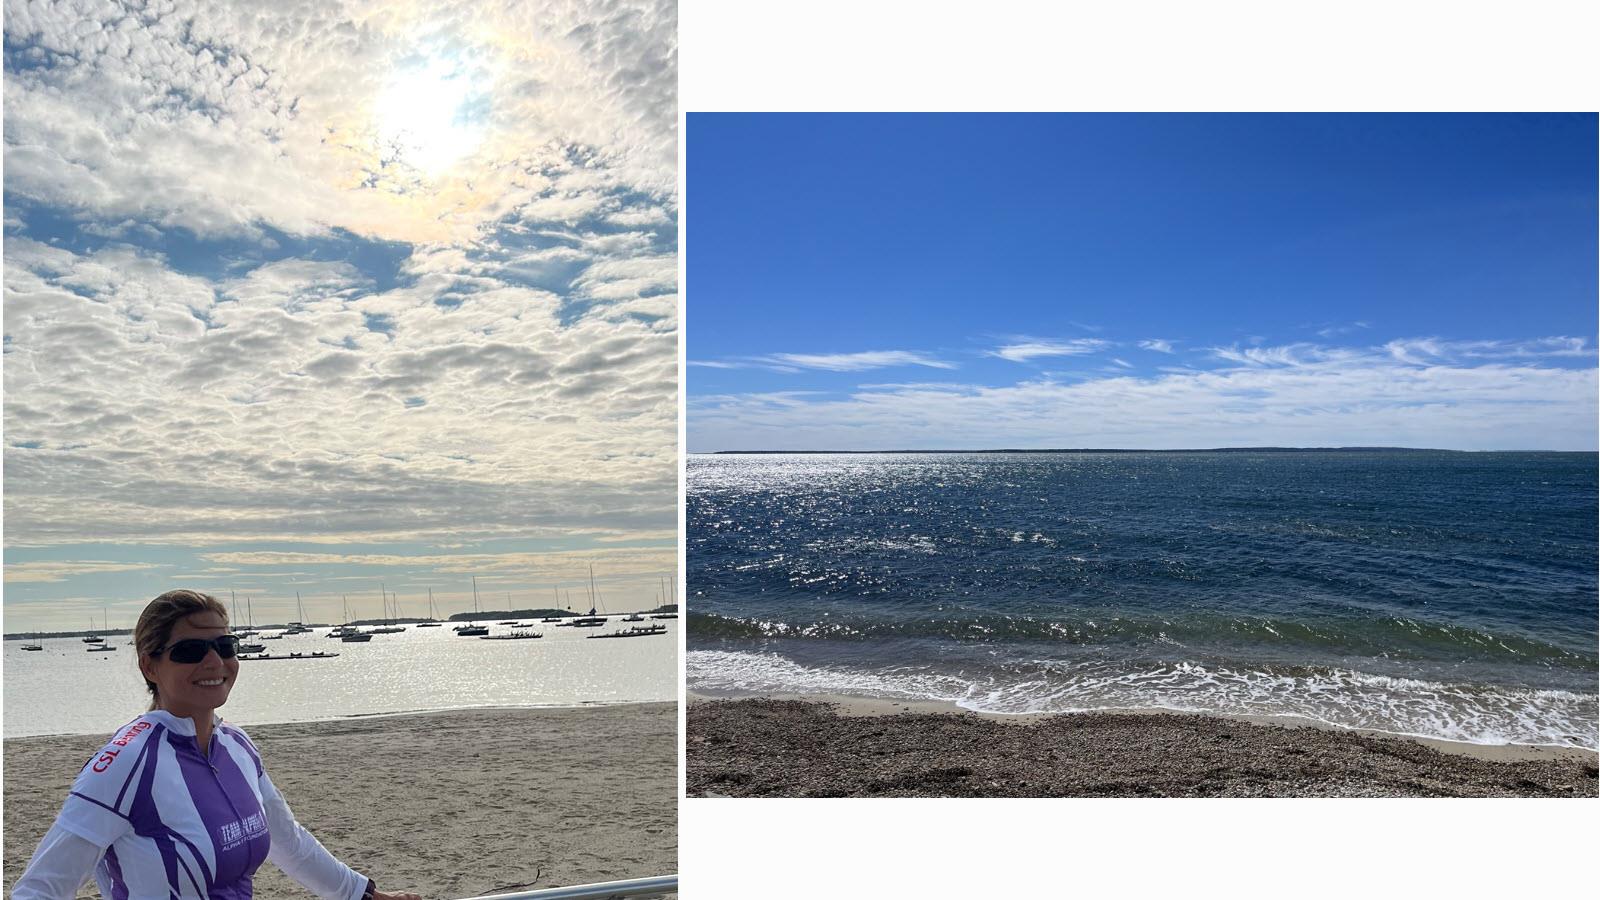 Two views of Cape Cod, including boats anchored just offshore and waves crashing on the beach